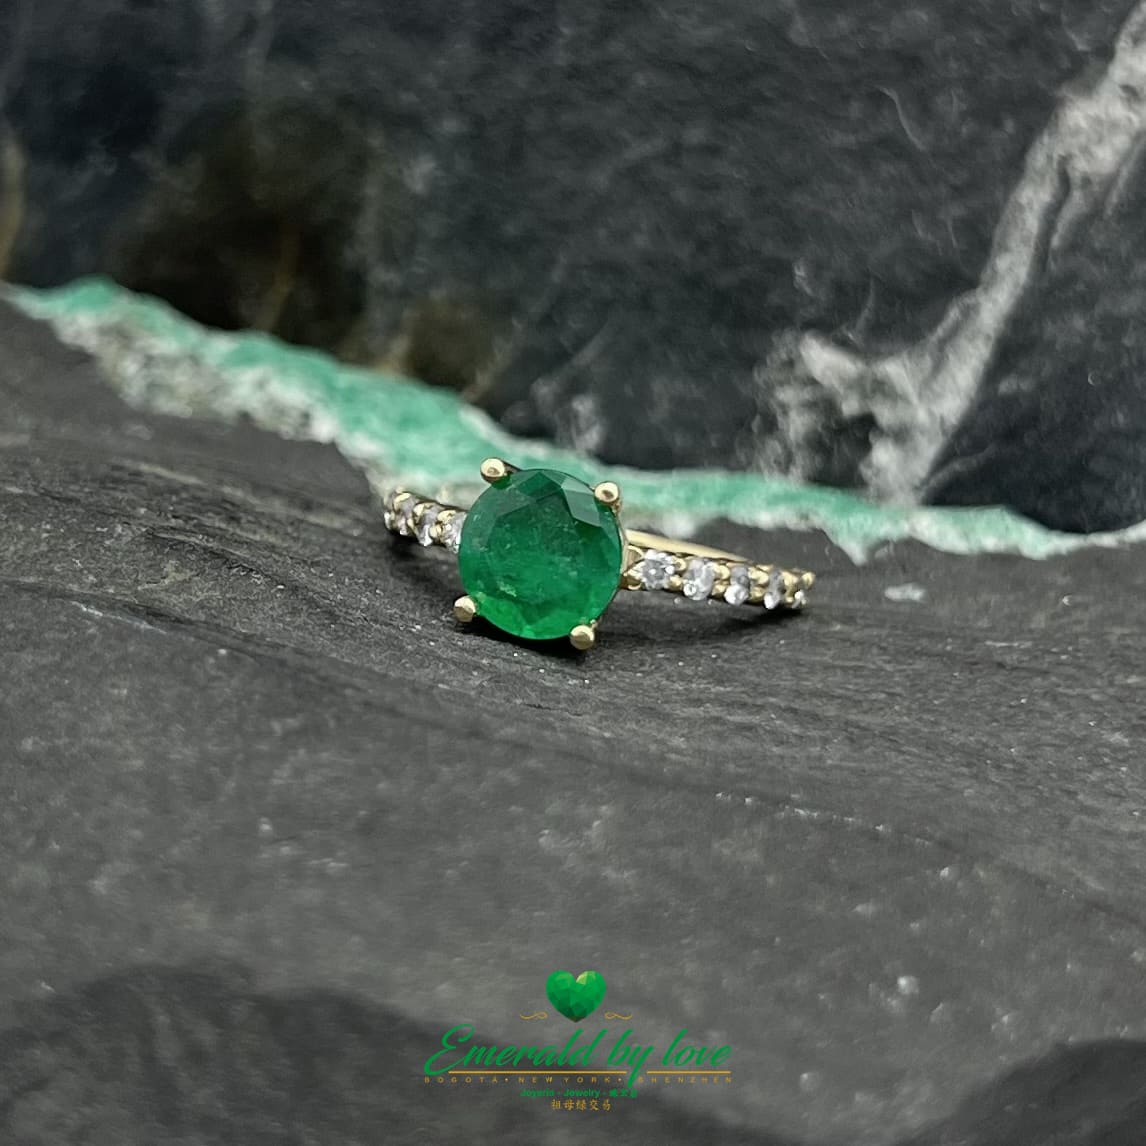 Eternal Enchantment: Yellow Gold Ring with Vivid Round Emerald and Diamond Encrusted Band